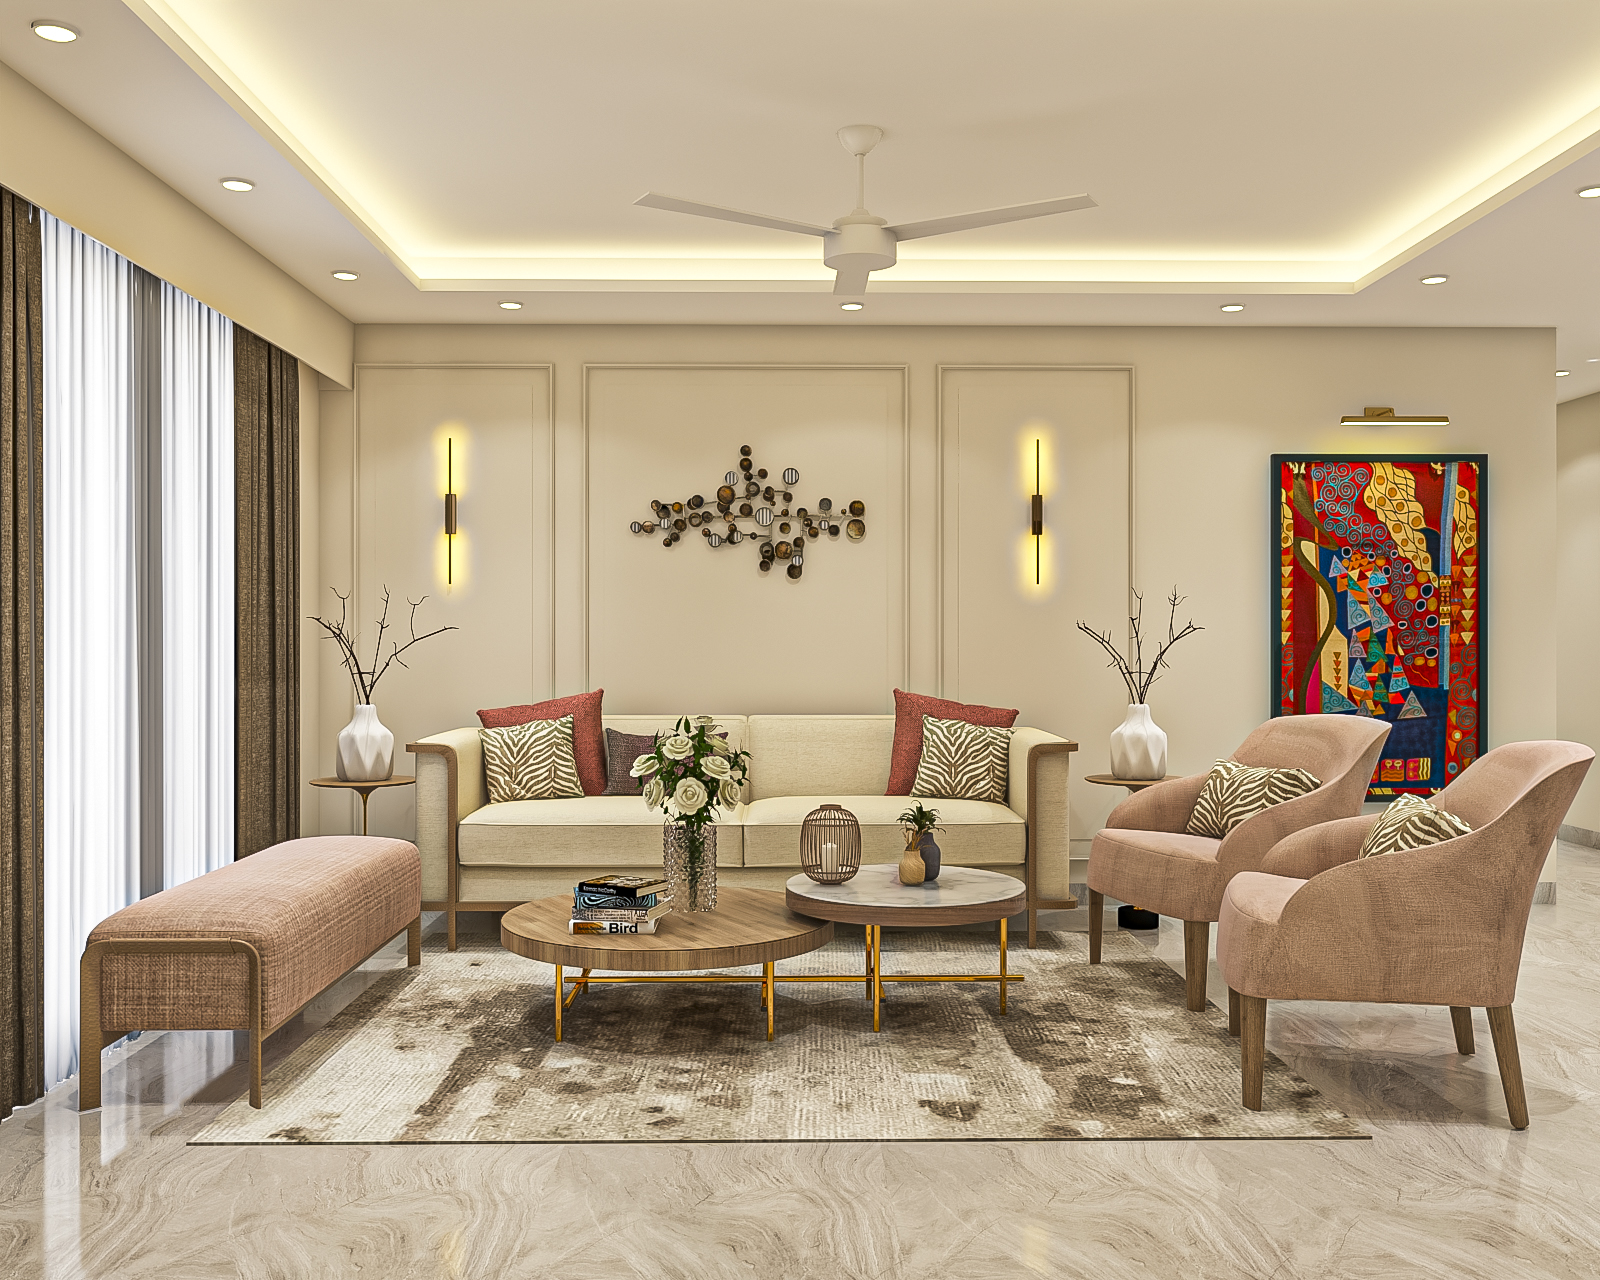 Living Room Design With Wall Décor